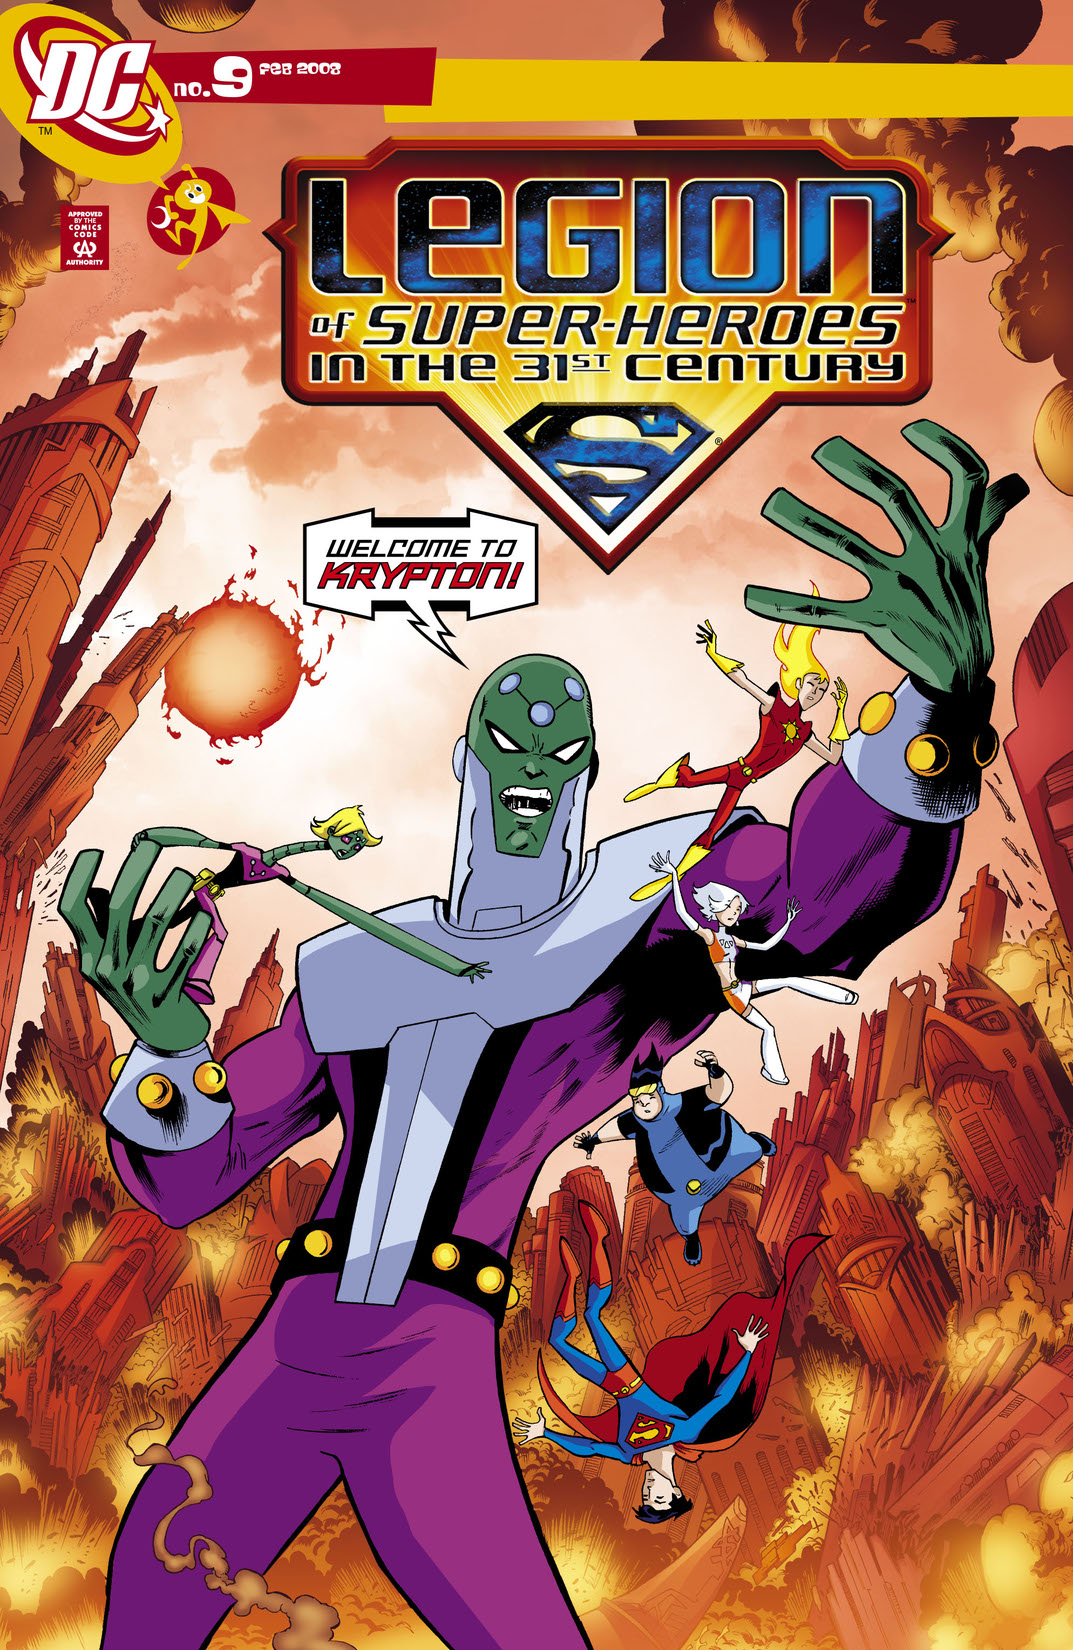 The Legion of Super-heroes in the 31st Century #9 preview images